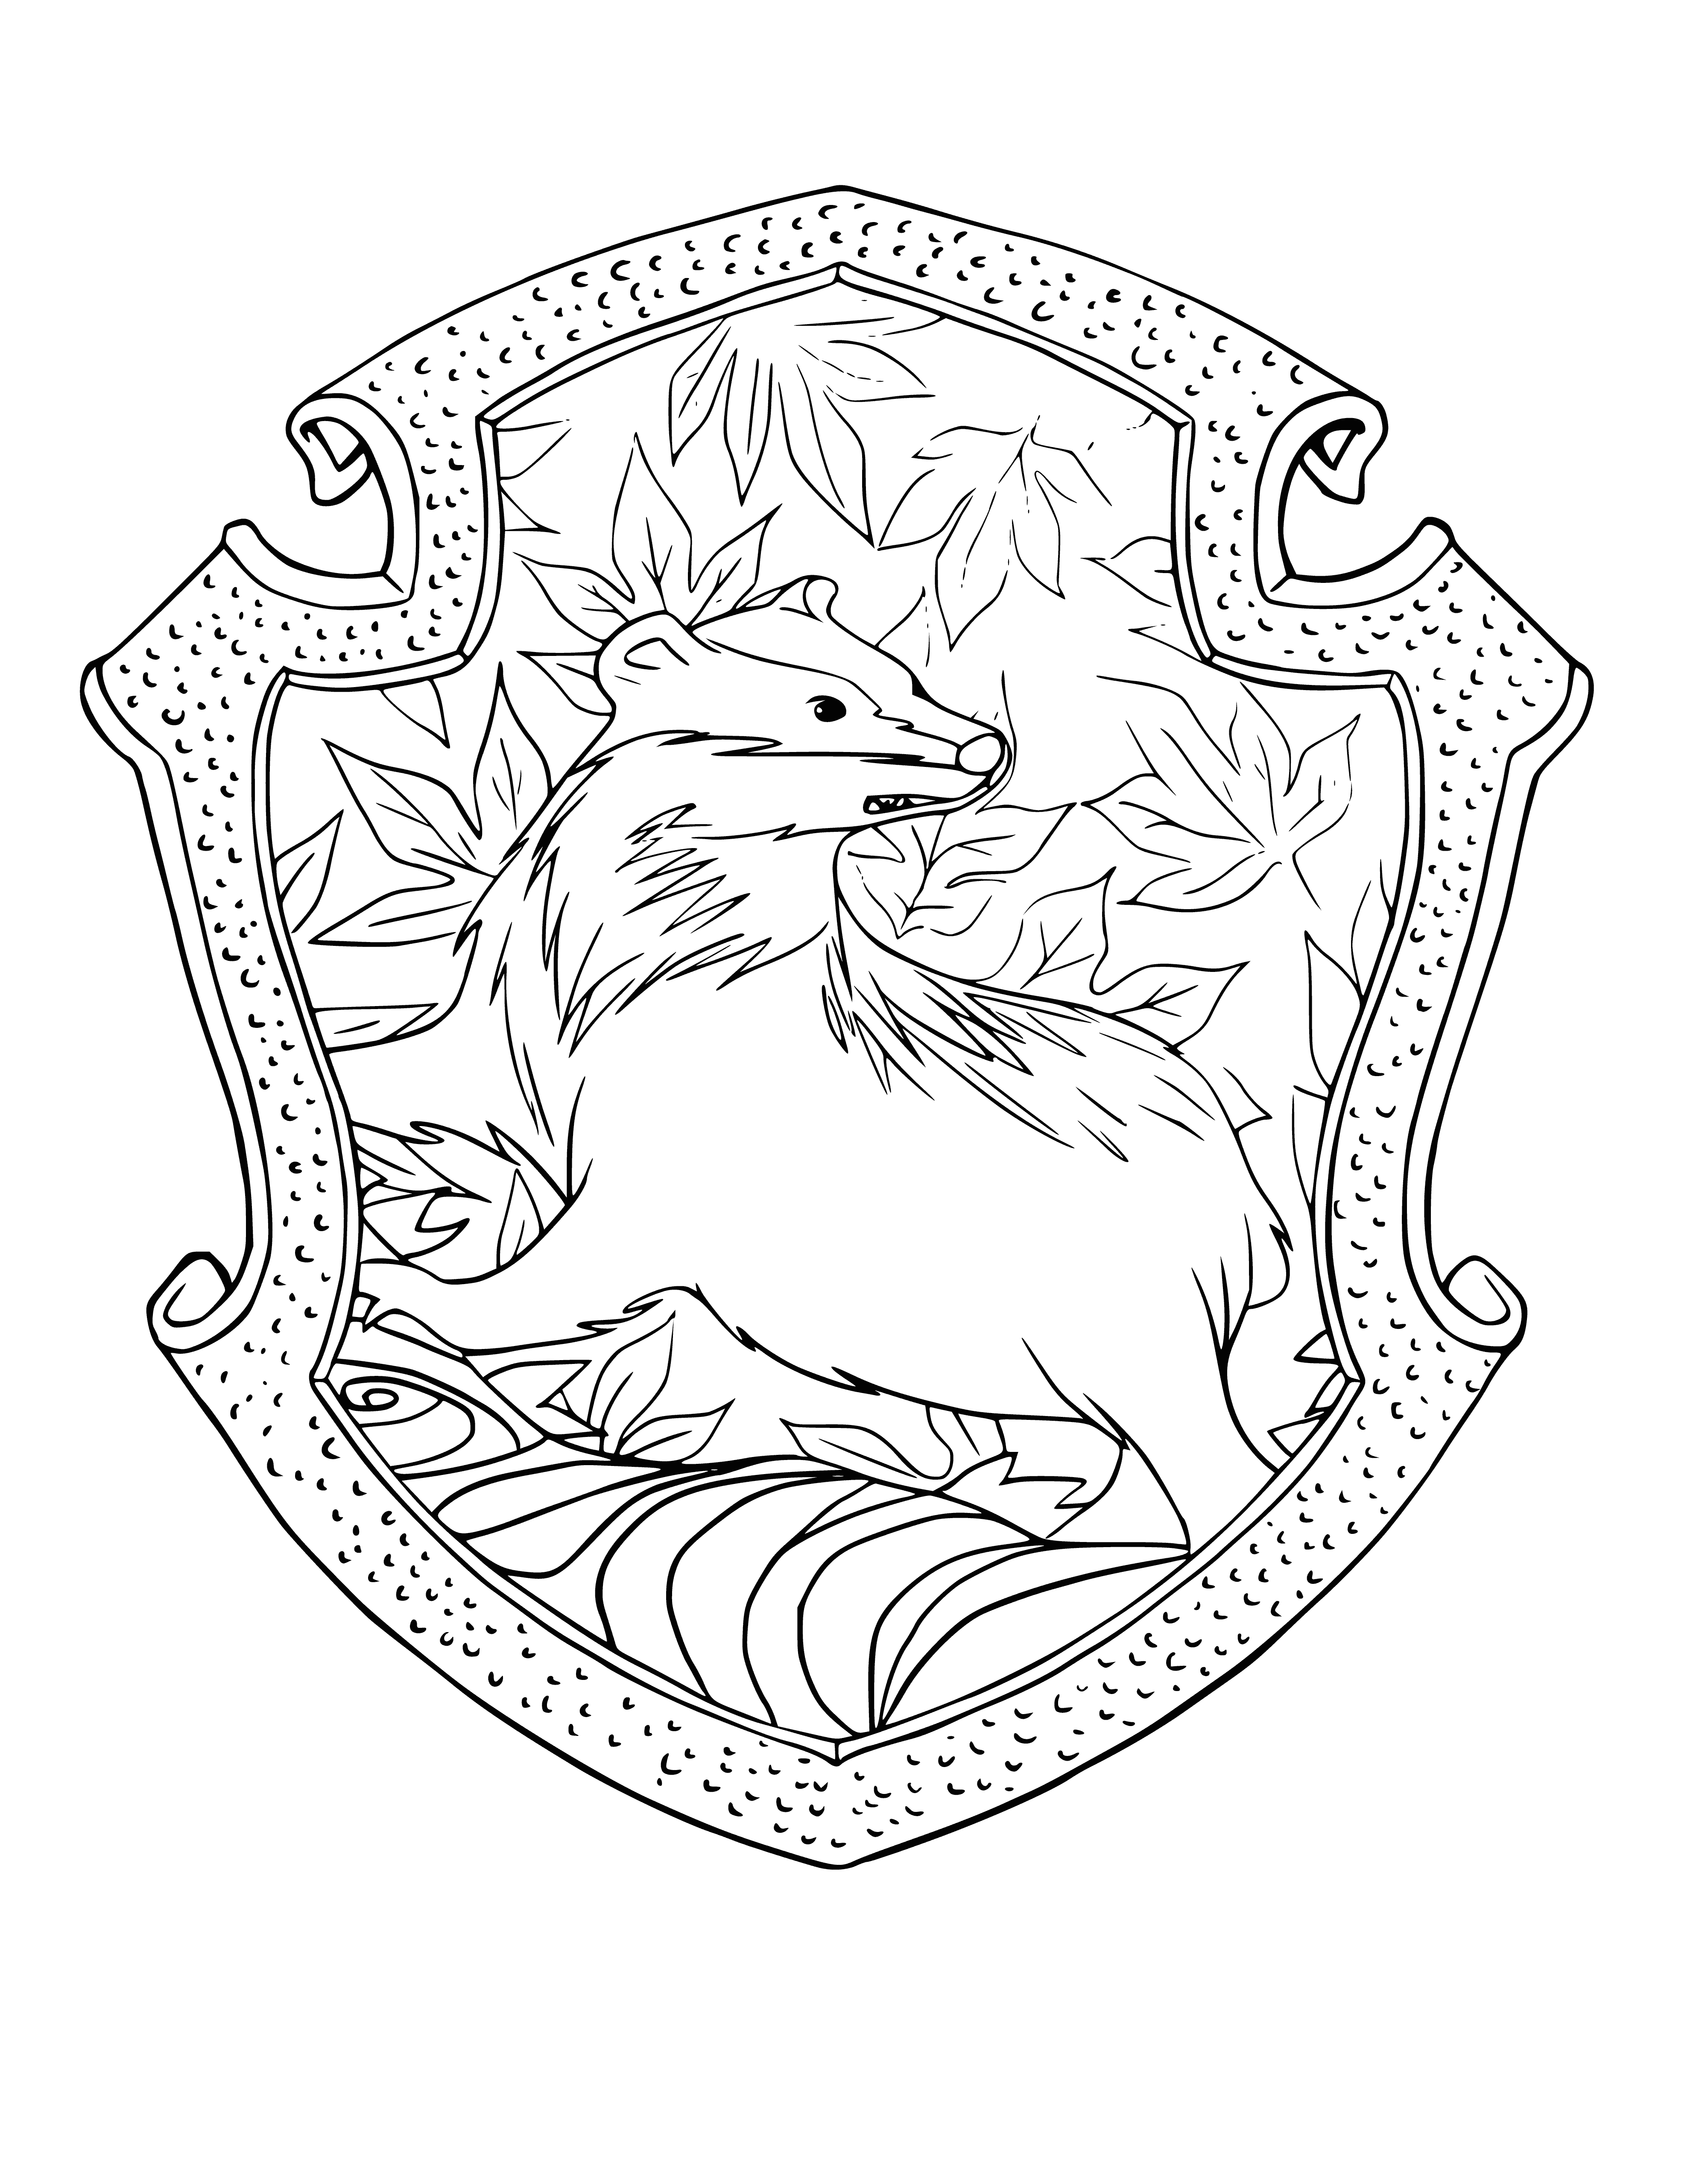 coloring page: Hufflepuff badge: a simple unadorned gold badger with no embellishments or colors.